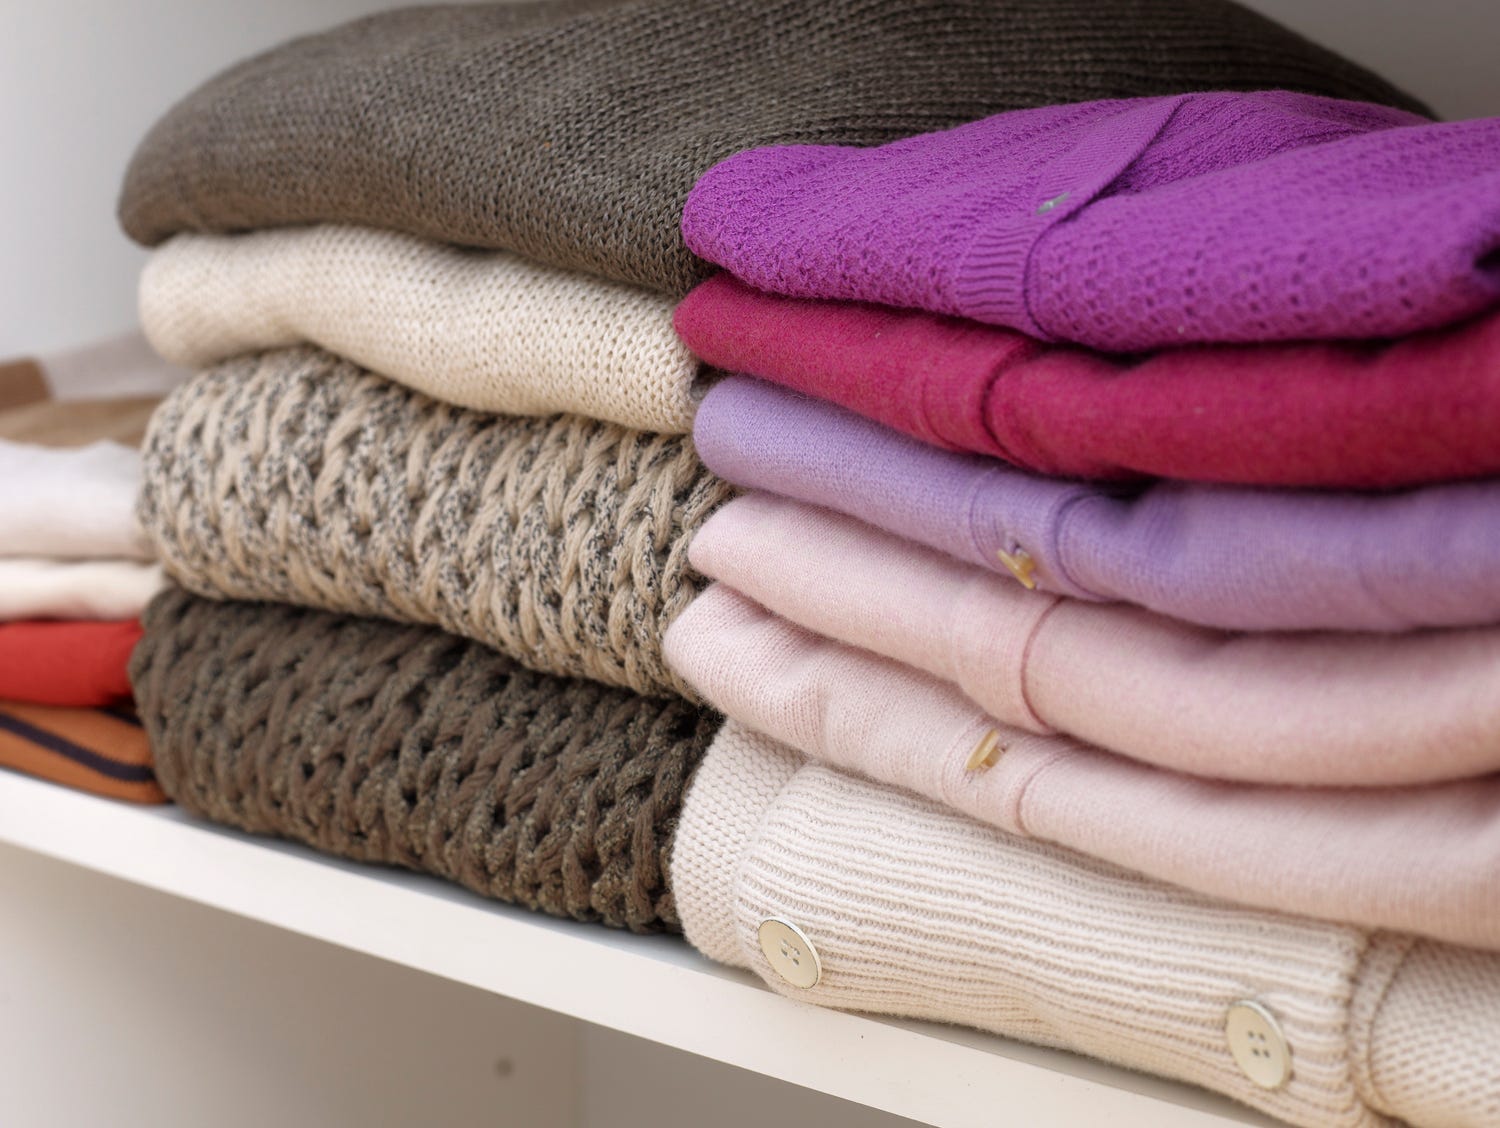 Sweaters folded and stacked on a shelf